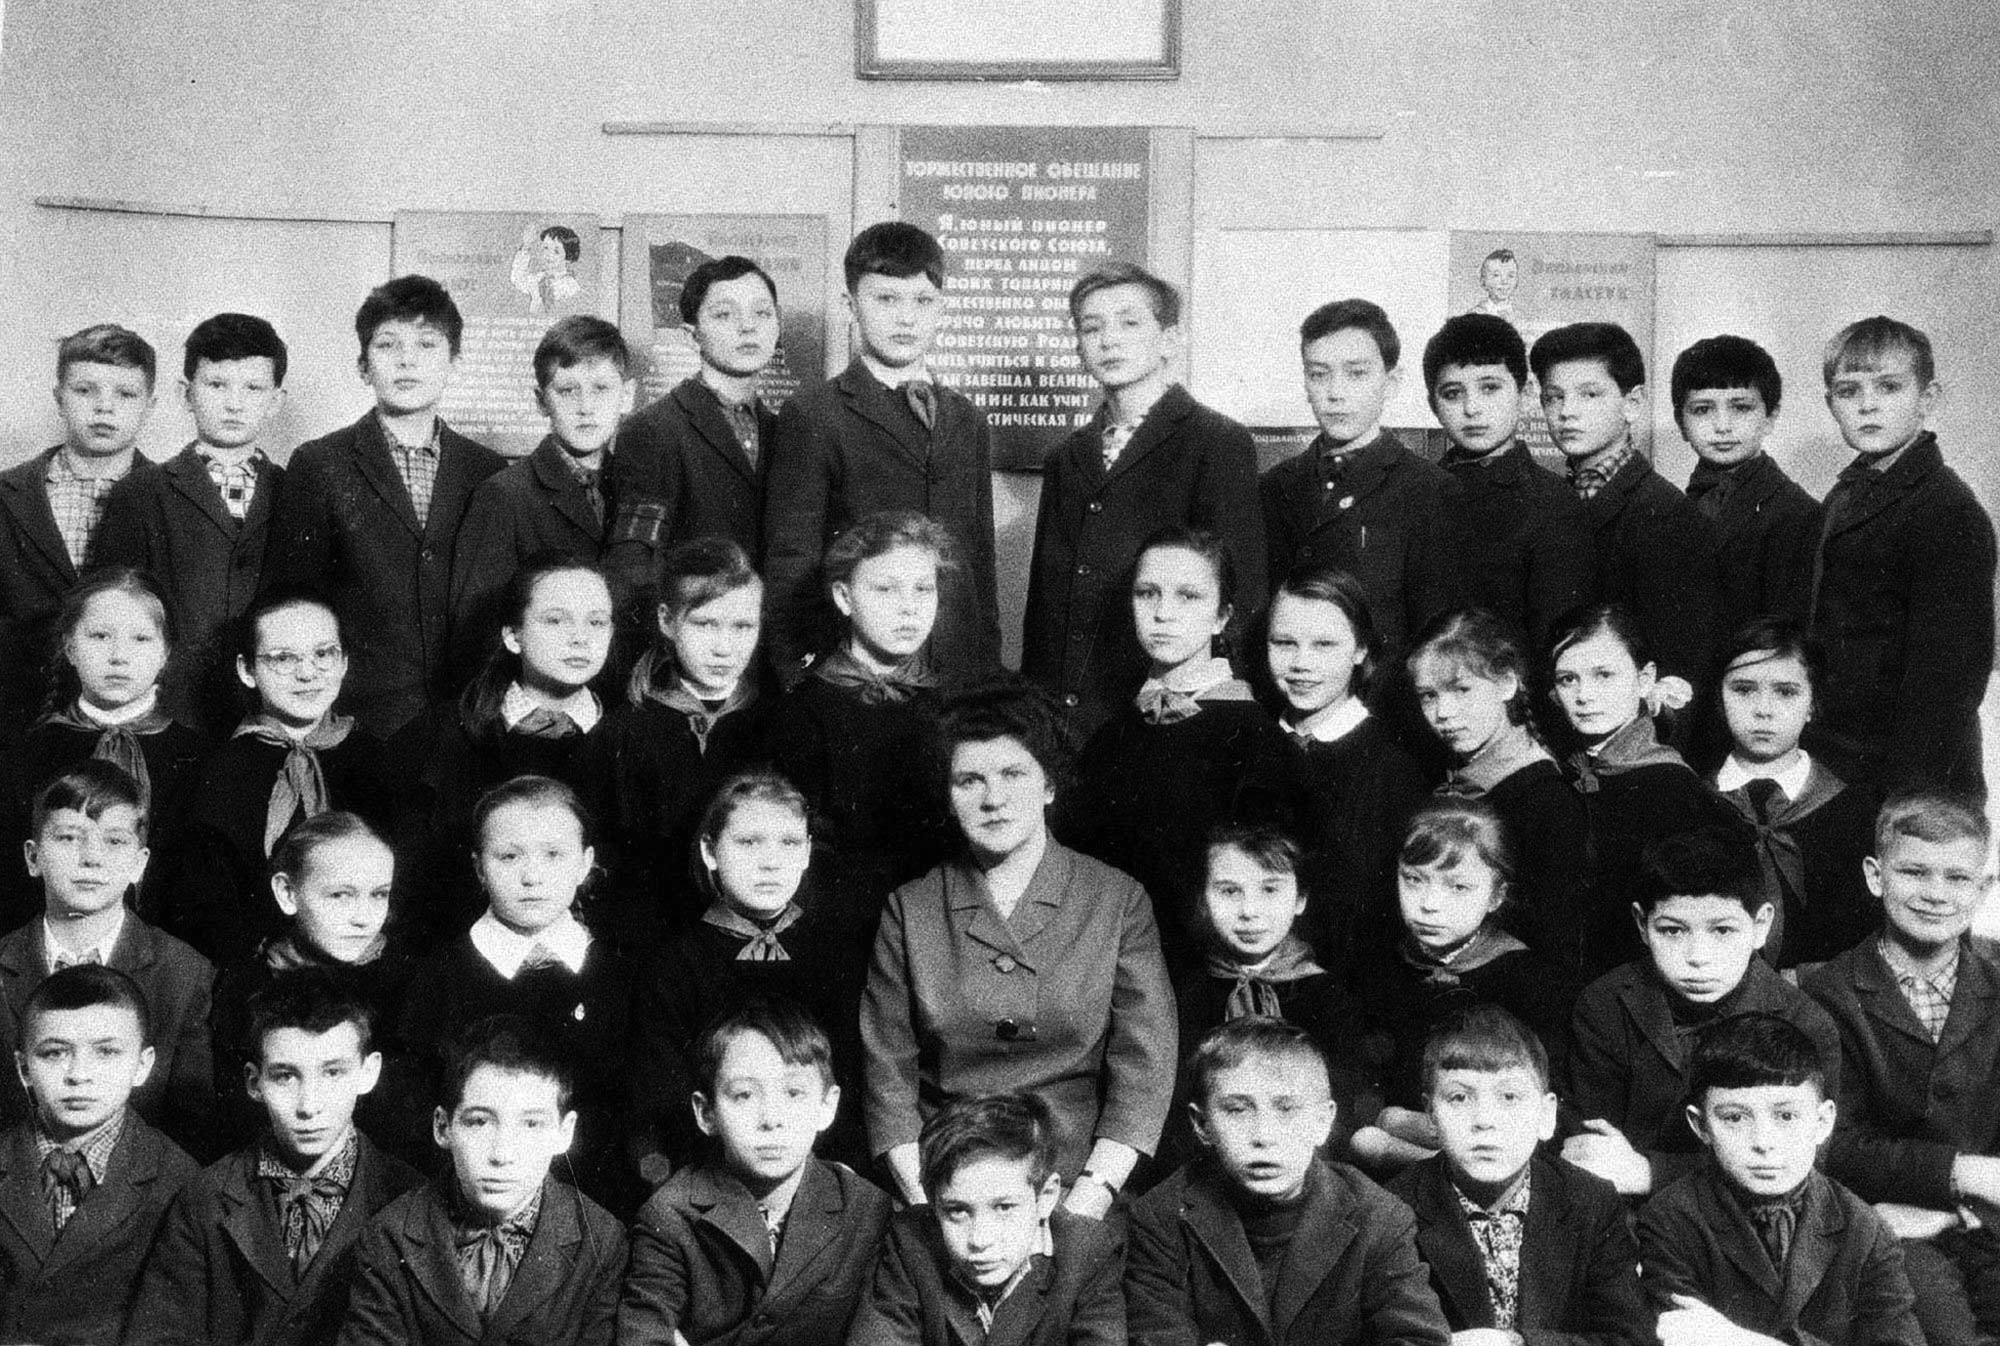 A class photo with Vladimir Putin, (first row, third from right), circa 1964-65.